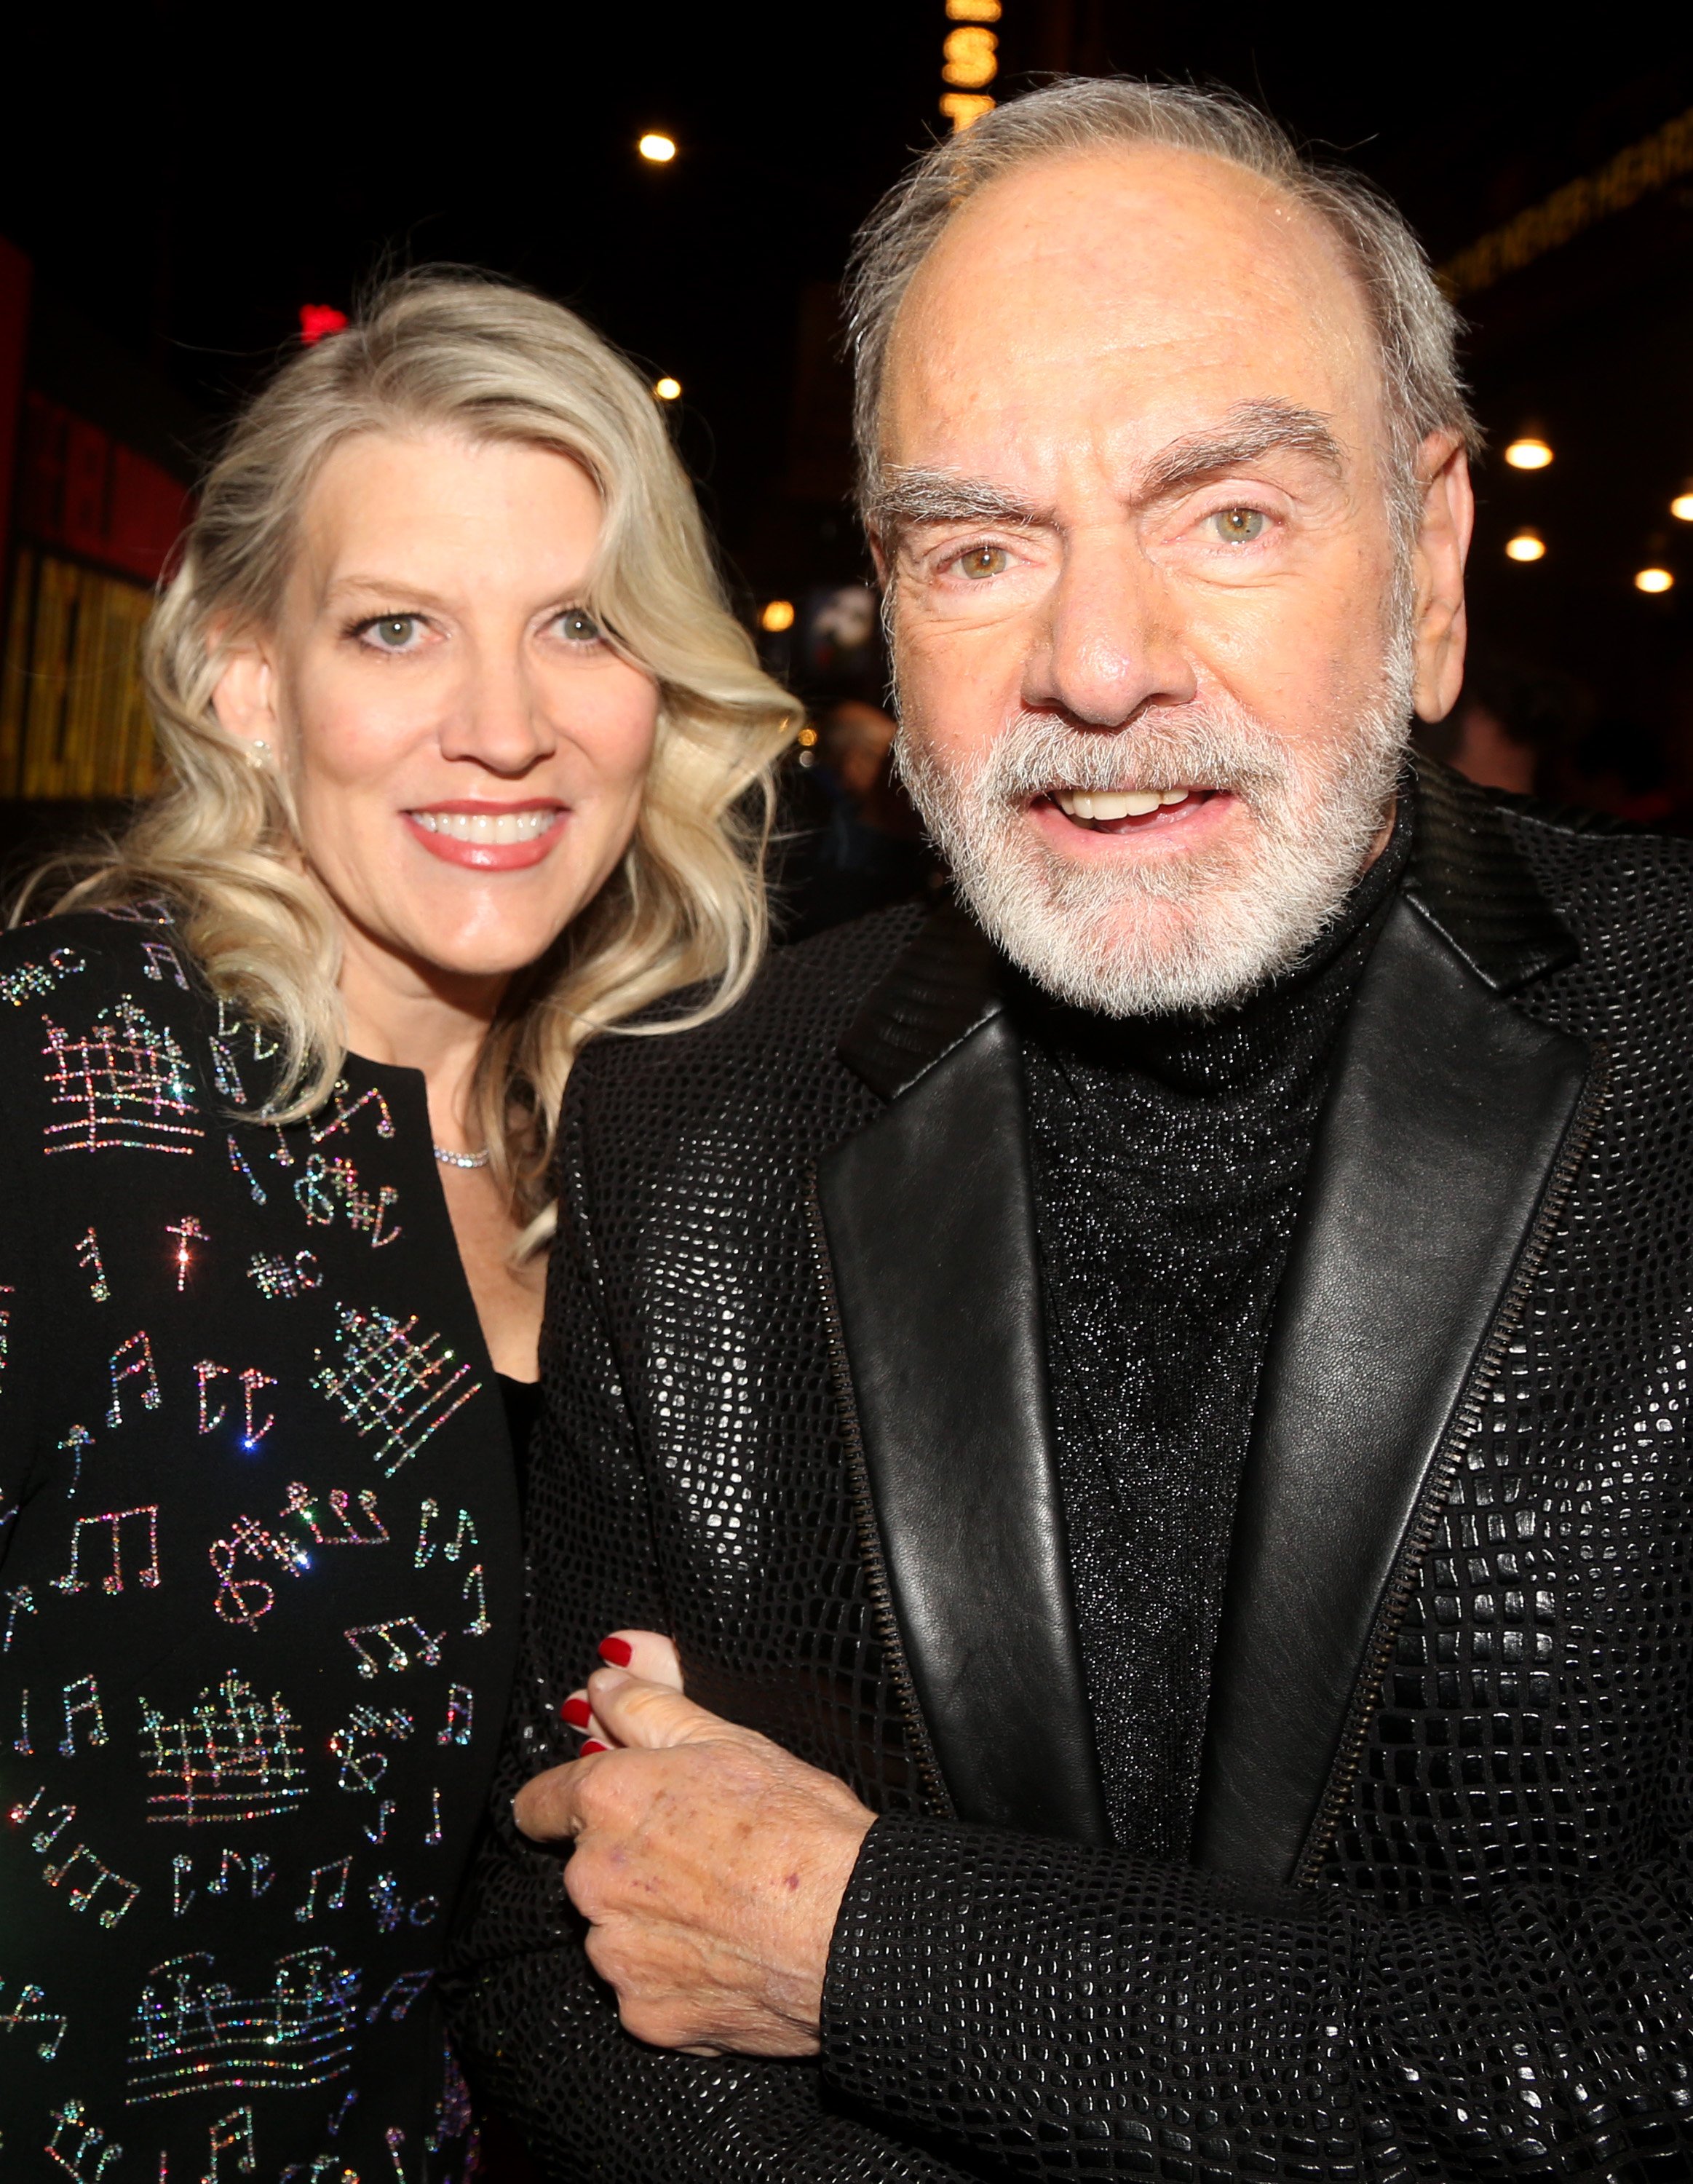 Katie McNeil Diamond and Neil Diamond at the opening night of his musical "A Beautiful Noise" on Broadway on December 4, 2022, in New York City | Source: Getty Images